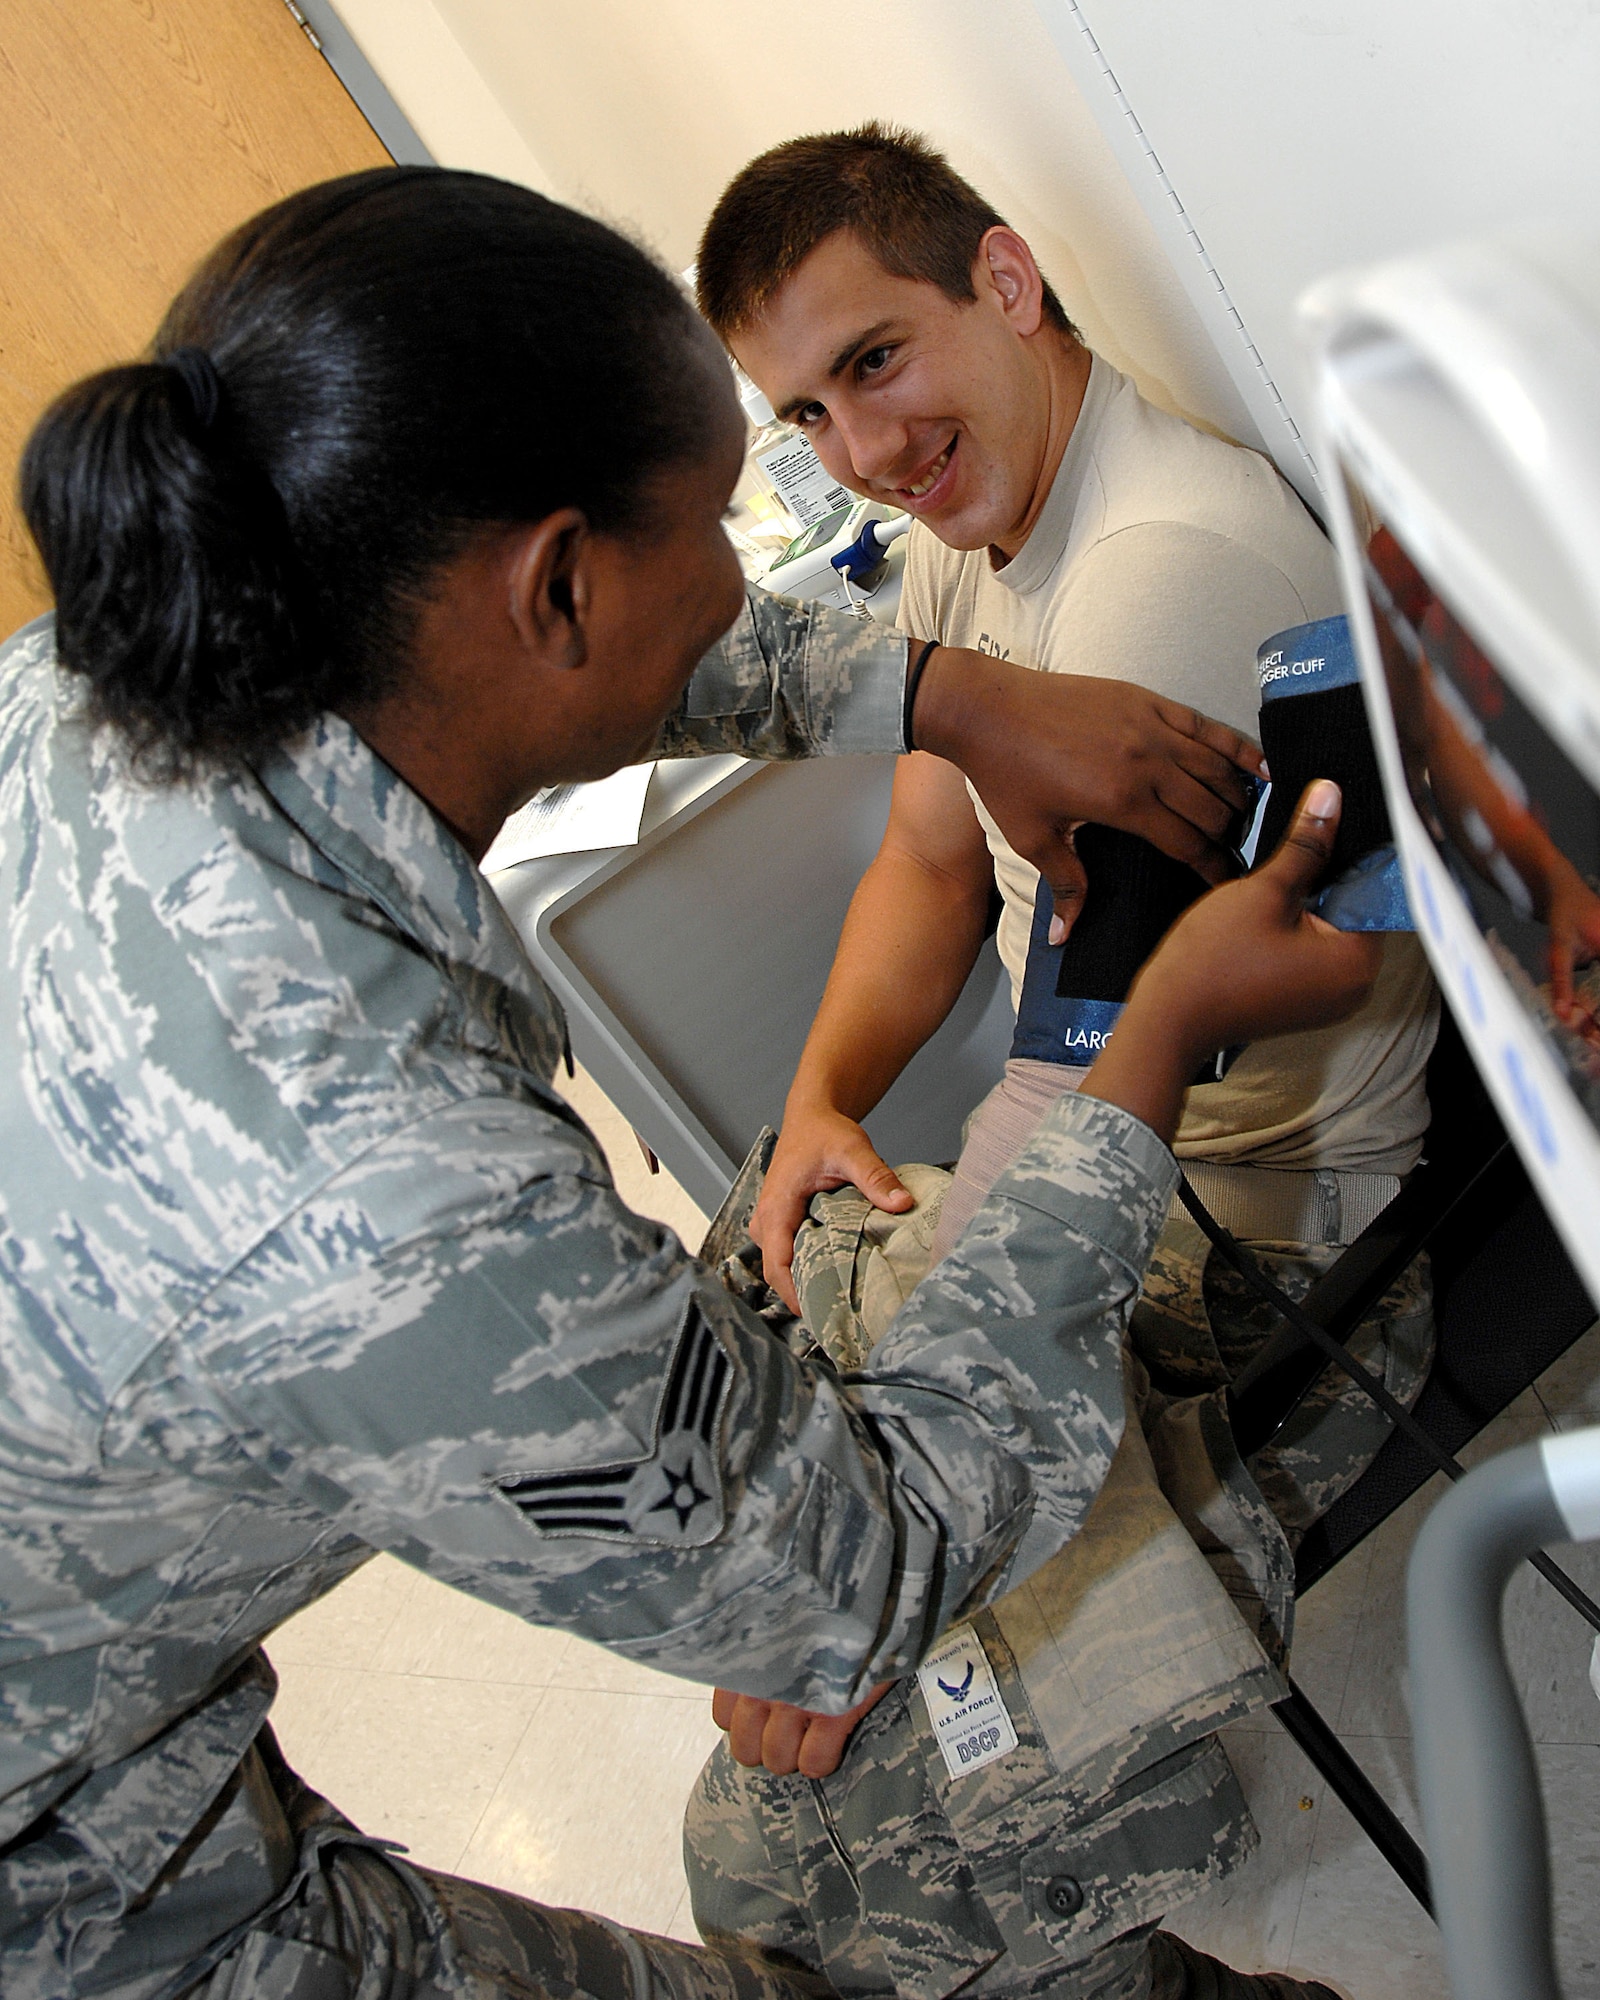 Senior Airman Brittany Prichett takes Airman 1st Class Ronald Frost's blood pressure July 12 in the new Urgent Care Center at Wilford Hall Medical Center, Lackland Air Force Base, Texas. The UCC replaced the Wilford Hall emergency room which closed July 1, 2011. The UCC treats acute minor illnesses and injuries and is not equipped or staffed to handle serious cases.  Patients with more severe issues should seek emergency medical care at Brooke Army Medical Center on Ft. Sam Houston or at the nearest emergency room. (U.S. Air Force Photo/SSgt Josie Walck)